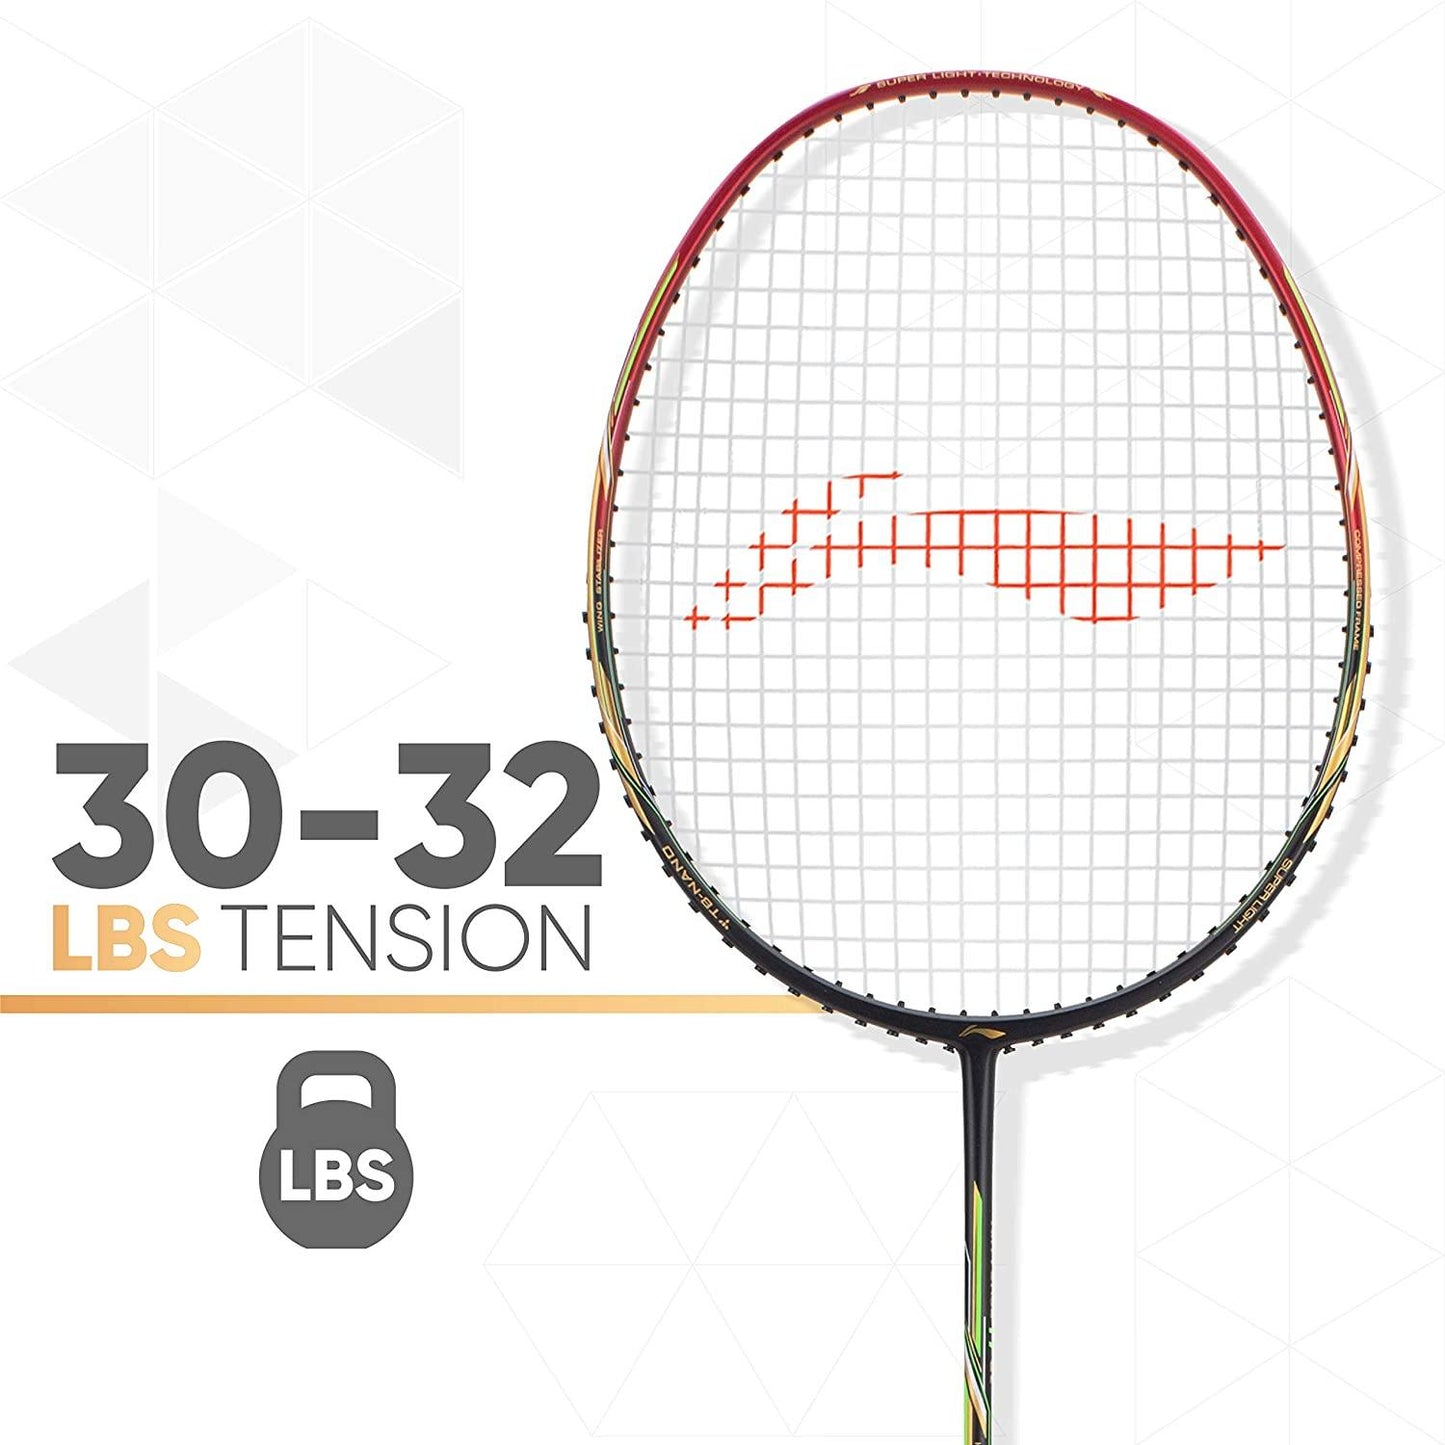 Li-Ning Air Force 77 G2 Carbon Fibre Badminton Racket with Free Full Cover Black/Red - Best Price online Prokicksports.com